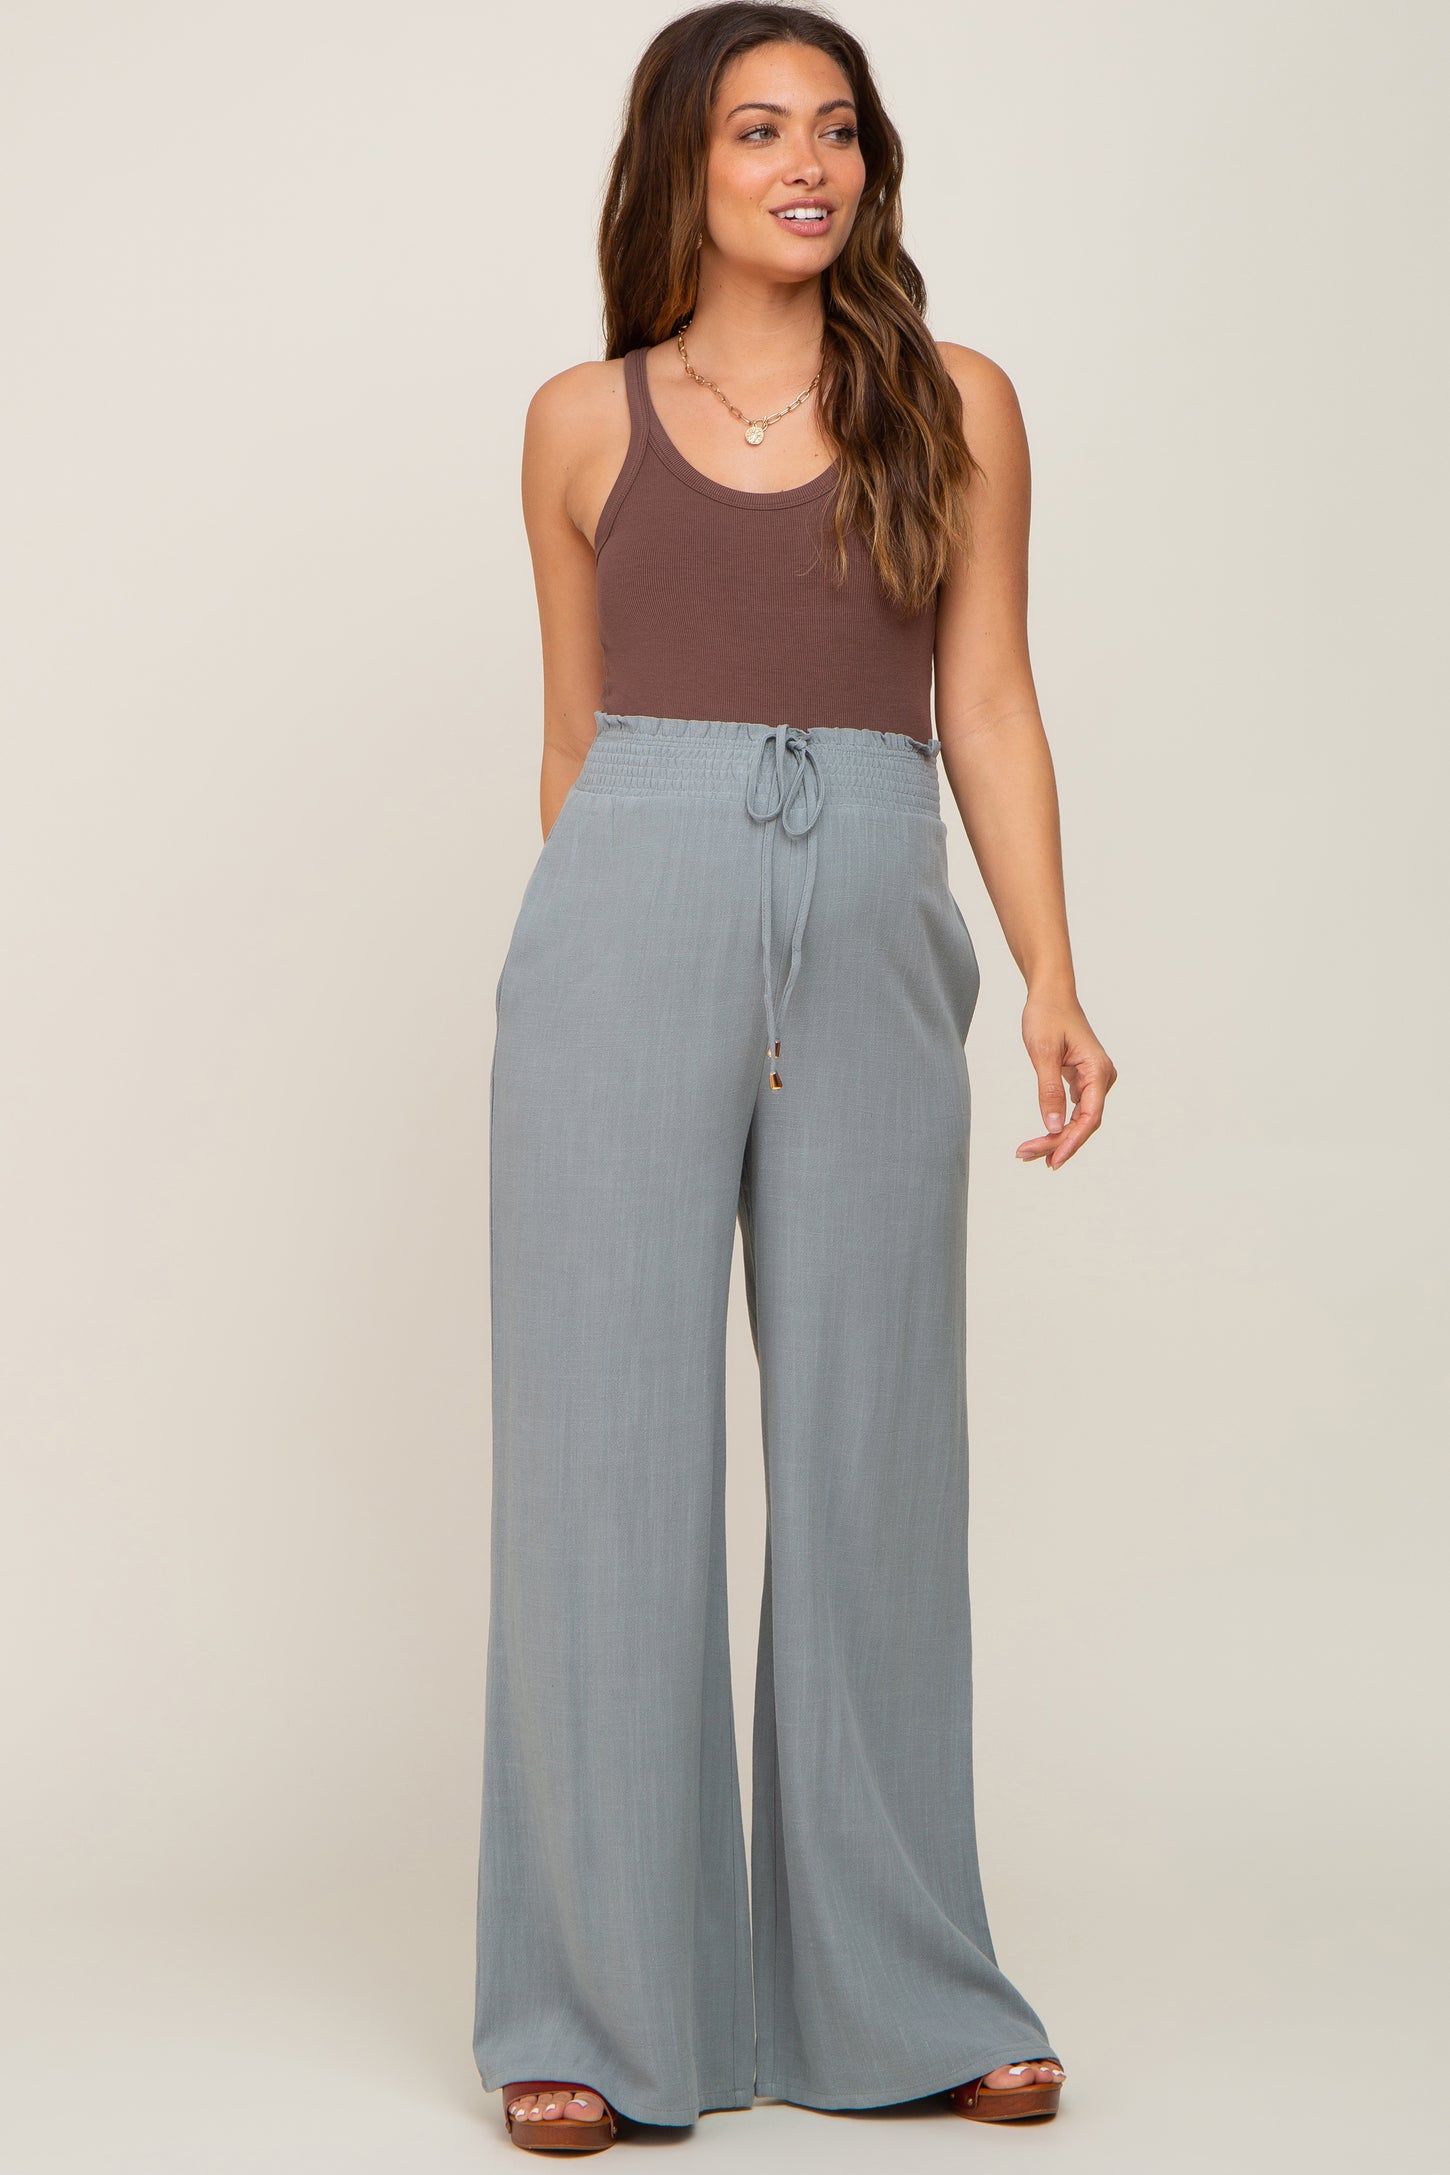 4 Linen Pants Outfits for Spring and Summer - Merrick's Art